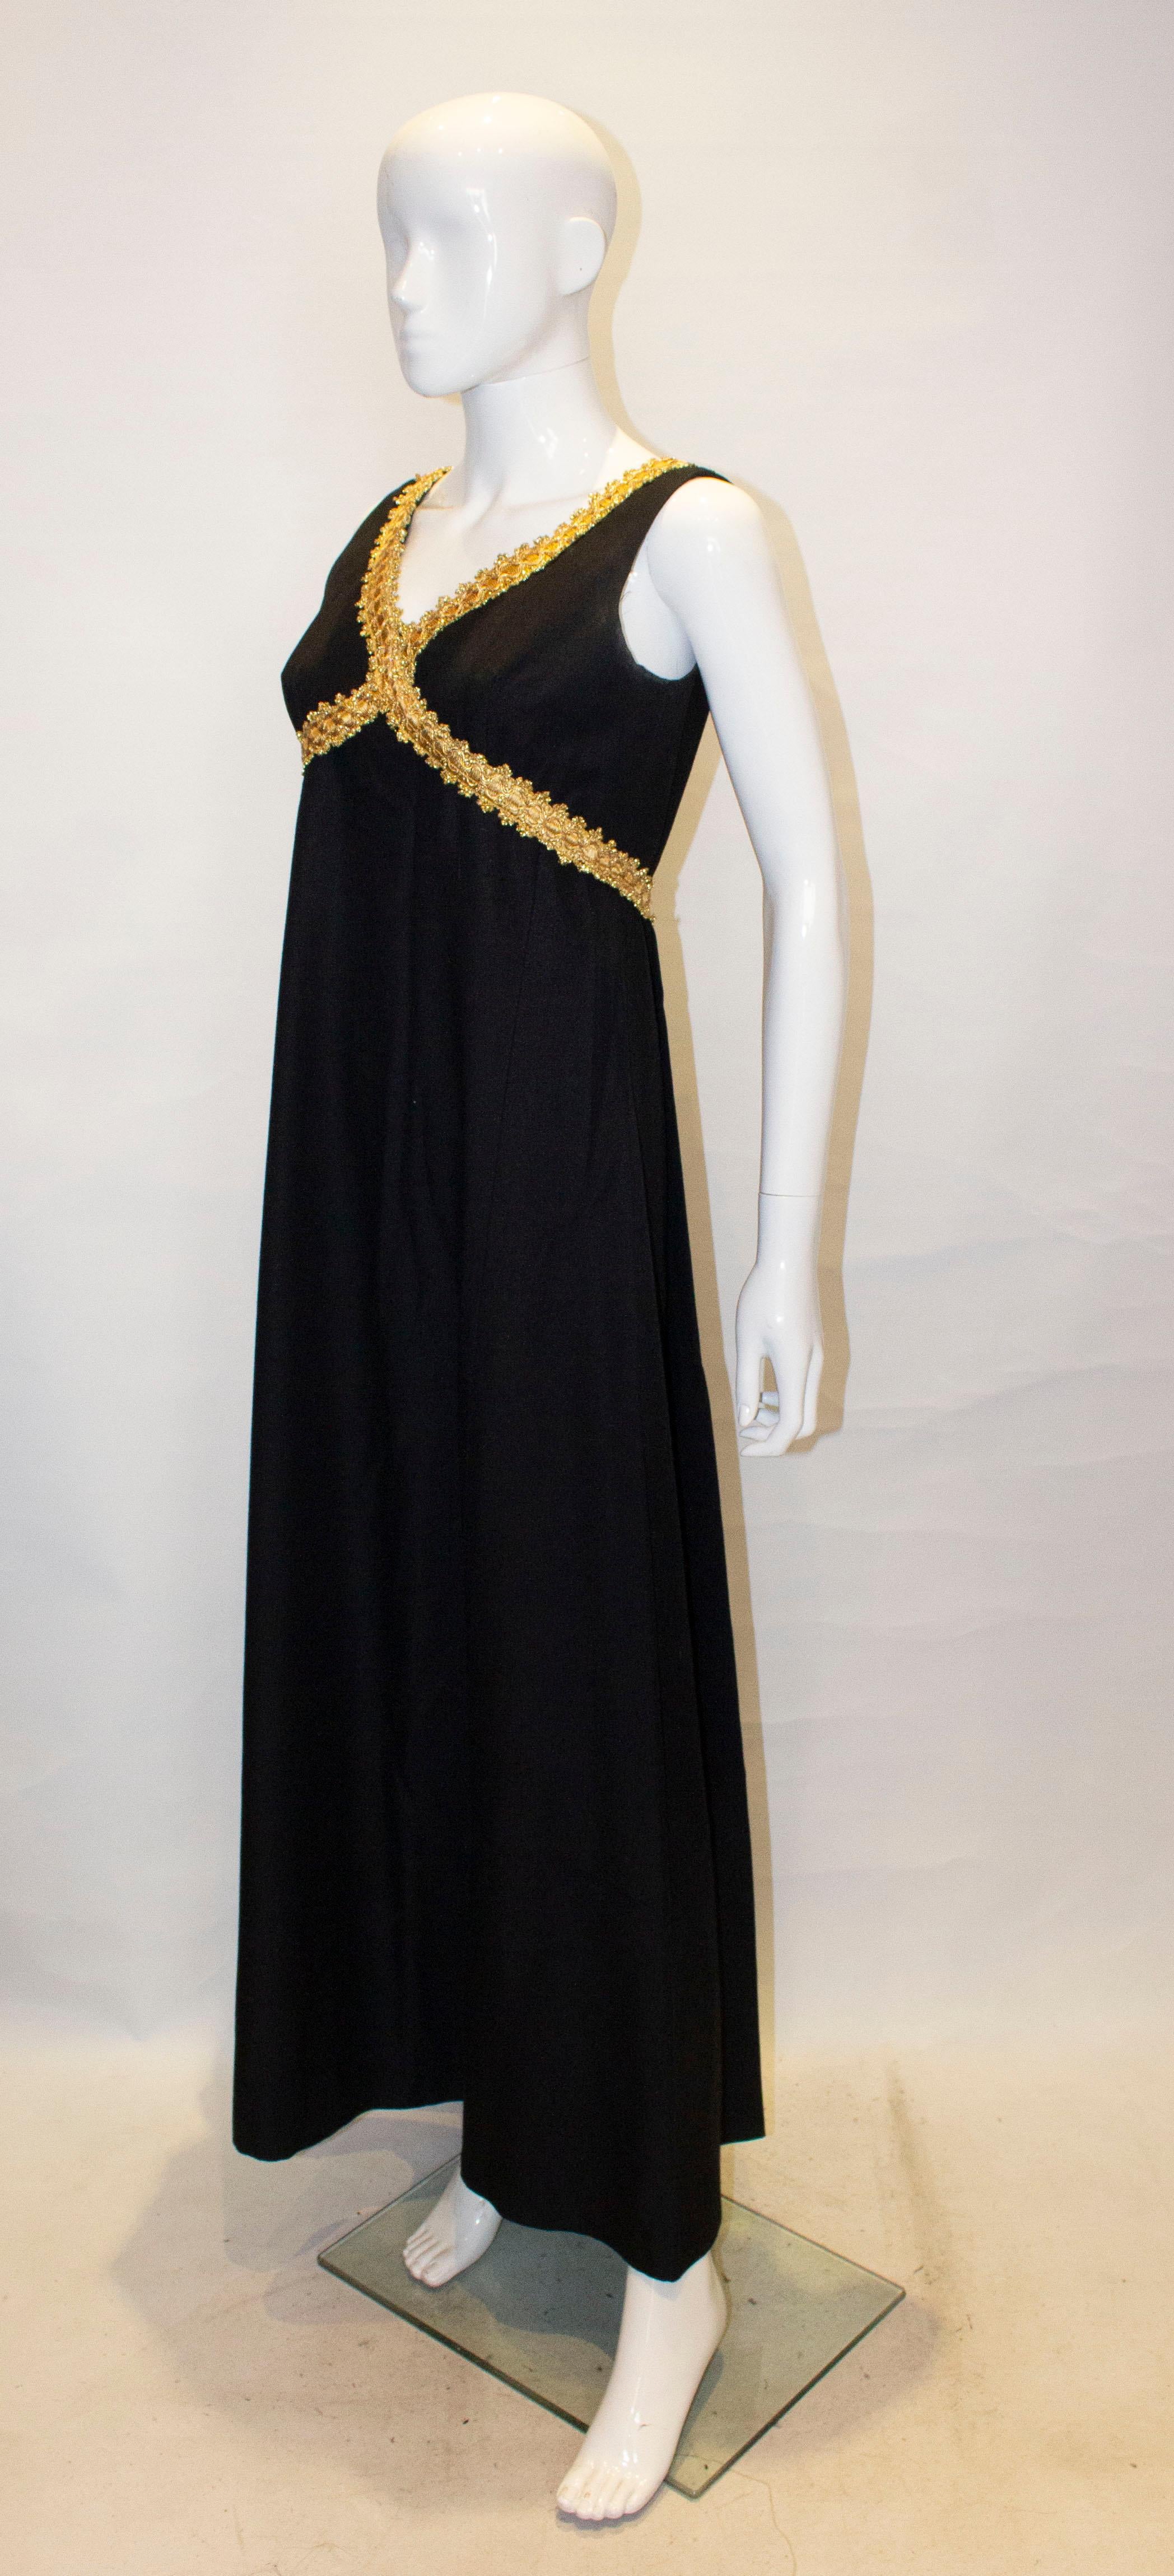 black and gold dress